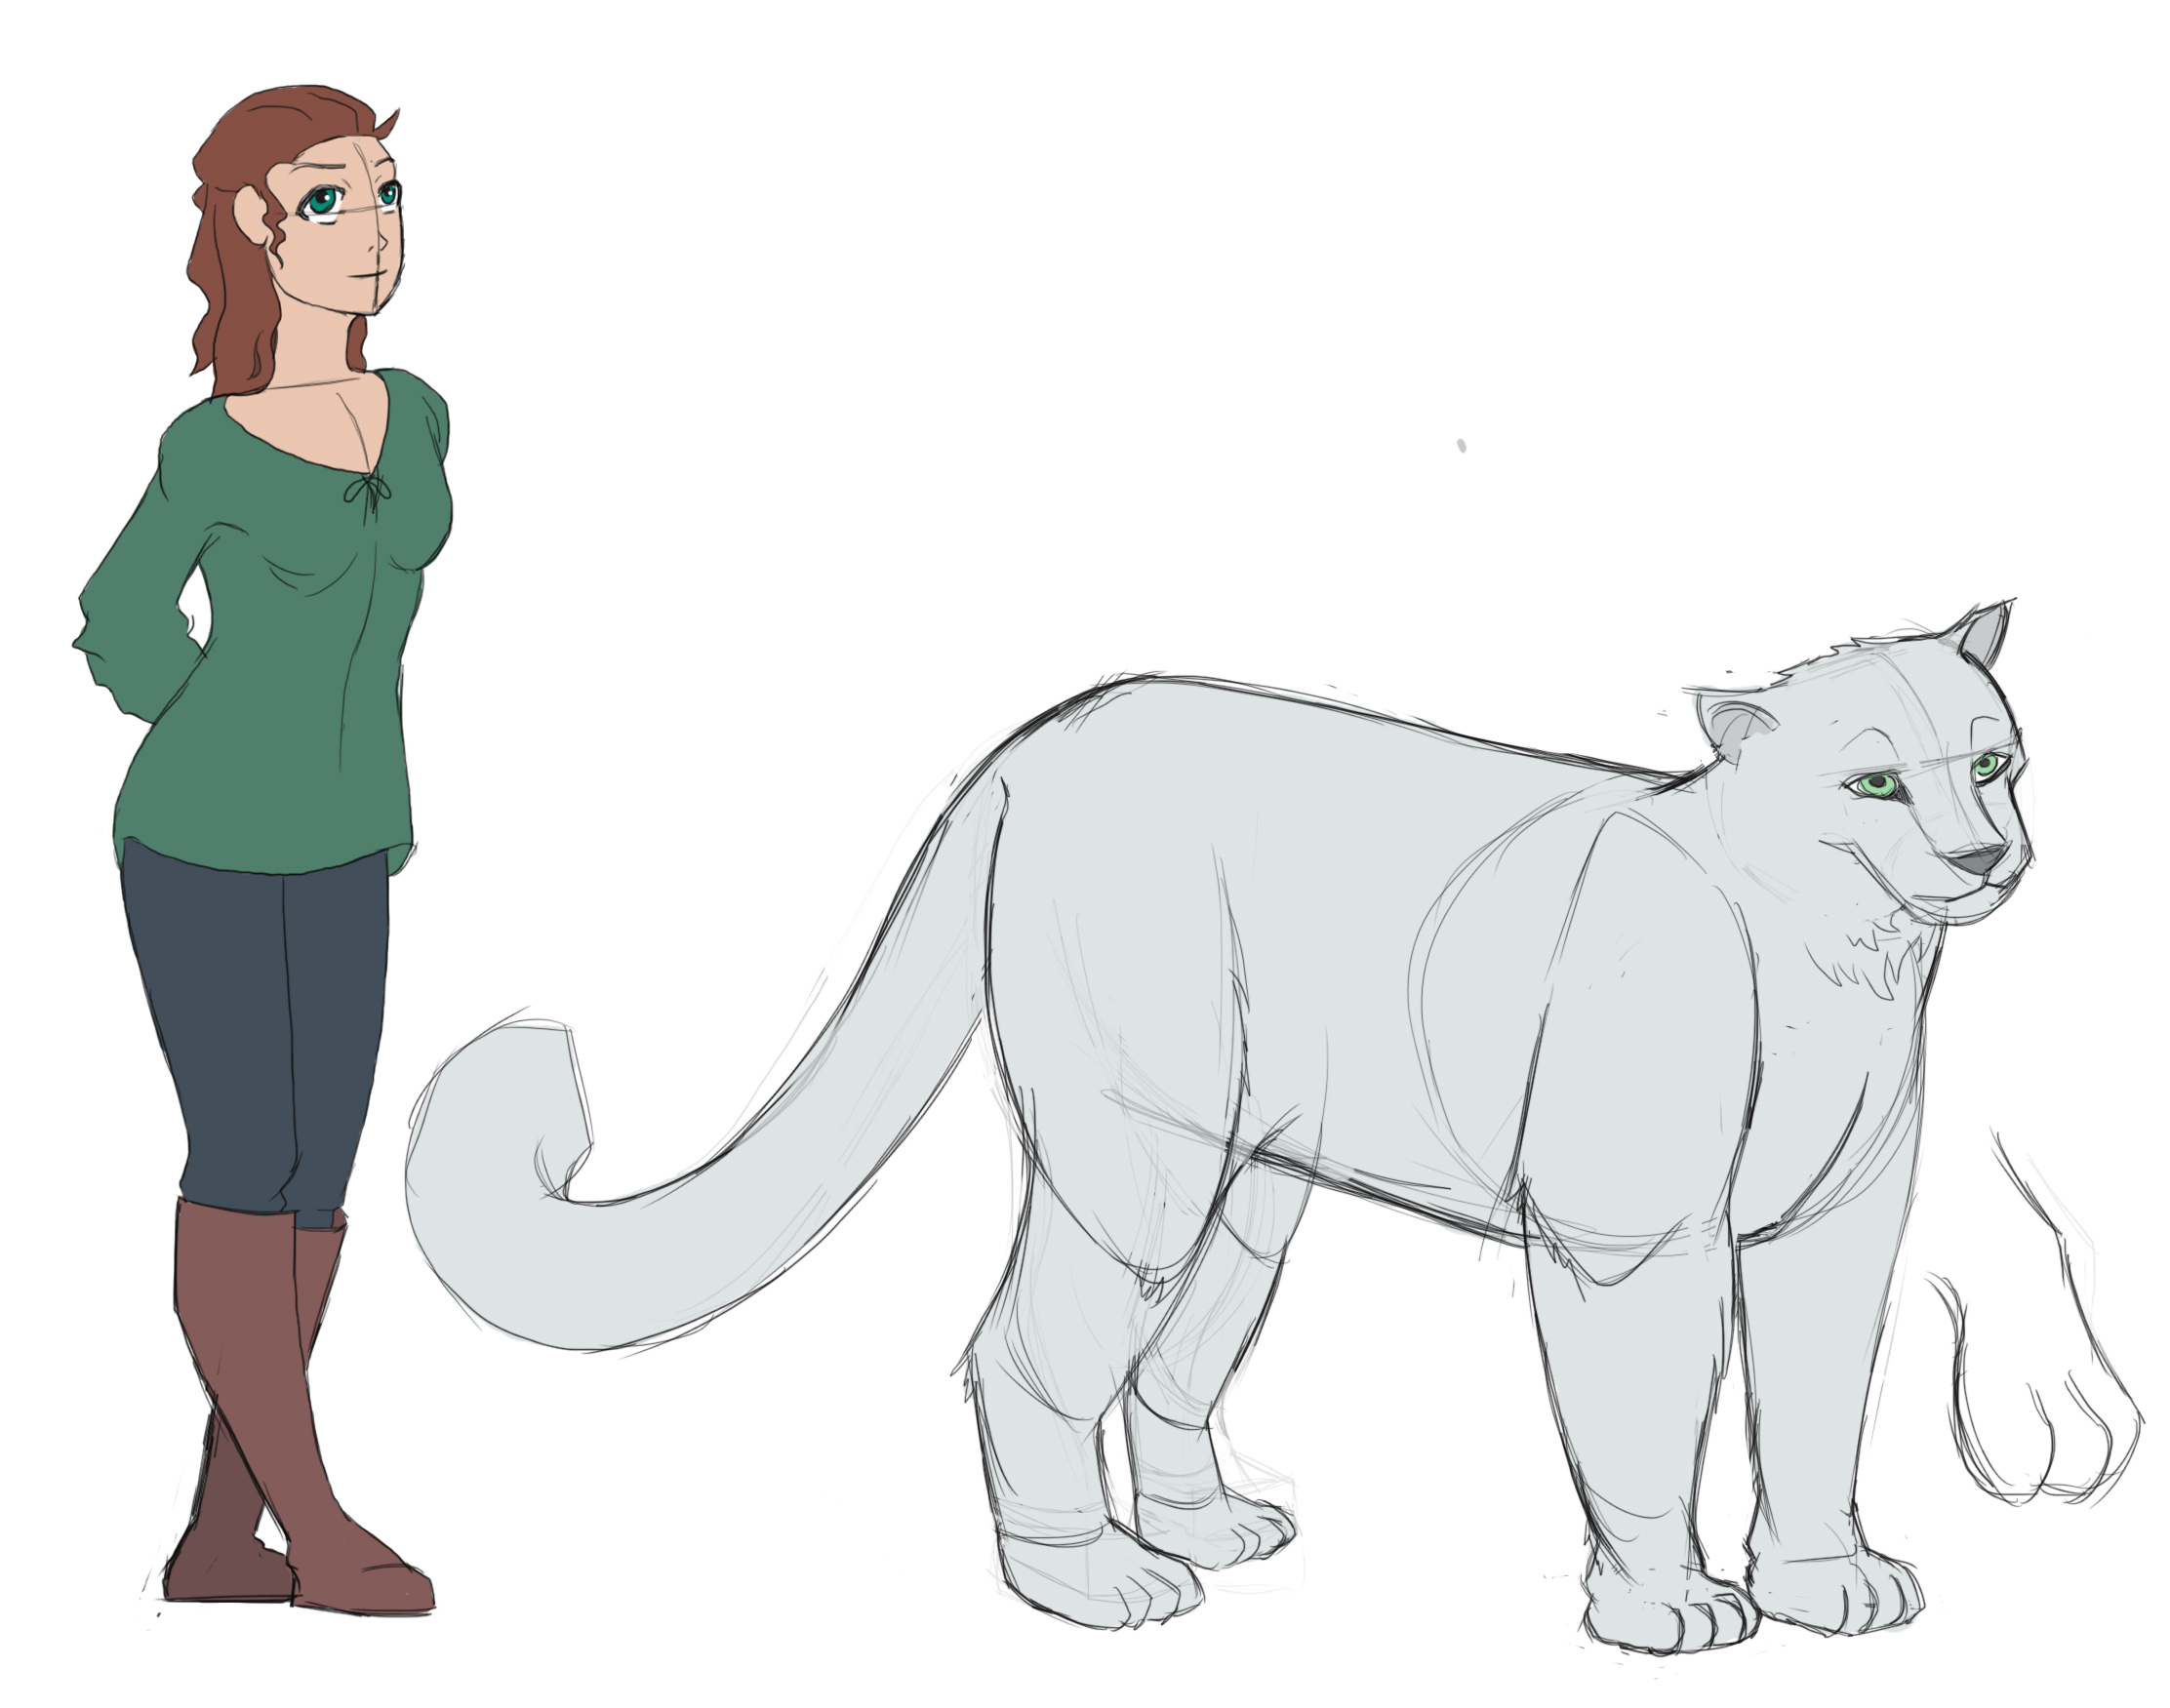 Tan, slim girl with pine-green eyes and matching shirt. Dark hair that is half-up and thrown behind her shoulders. Standing next to her is an average-sized mythical snow leopard, almost half of the girl’s height.